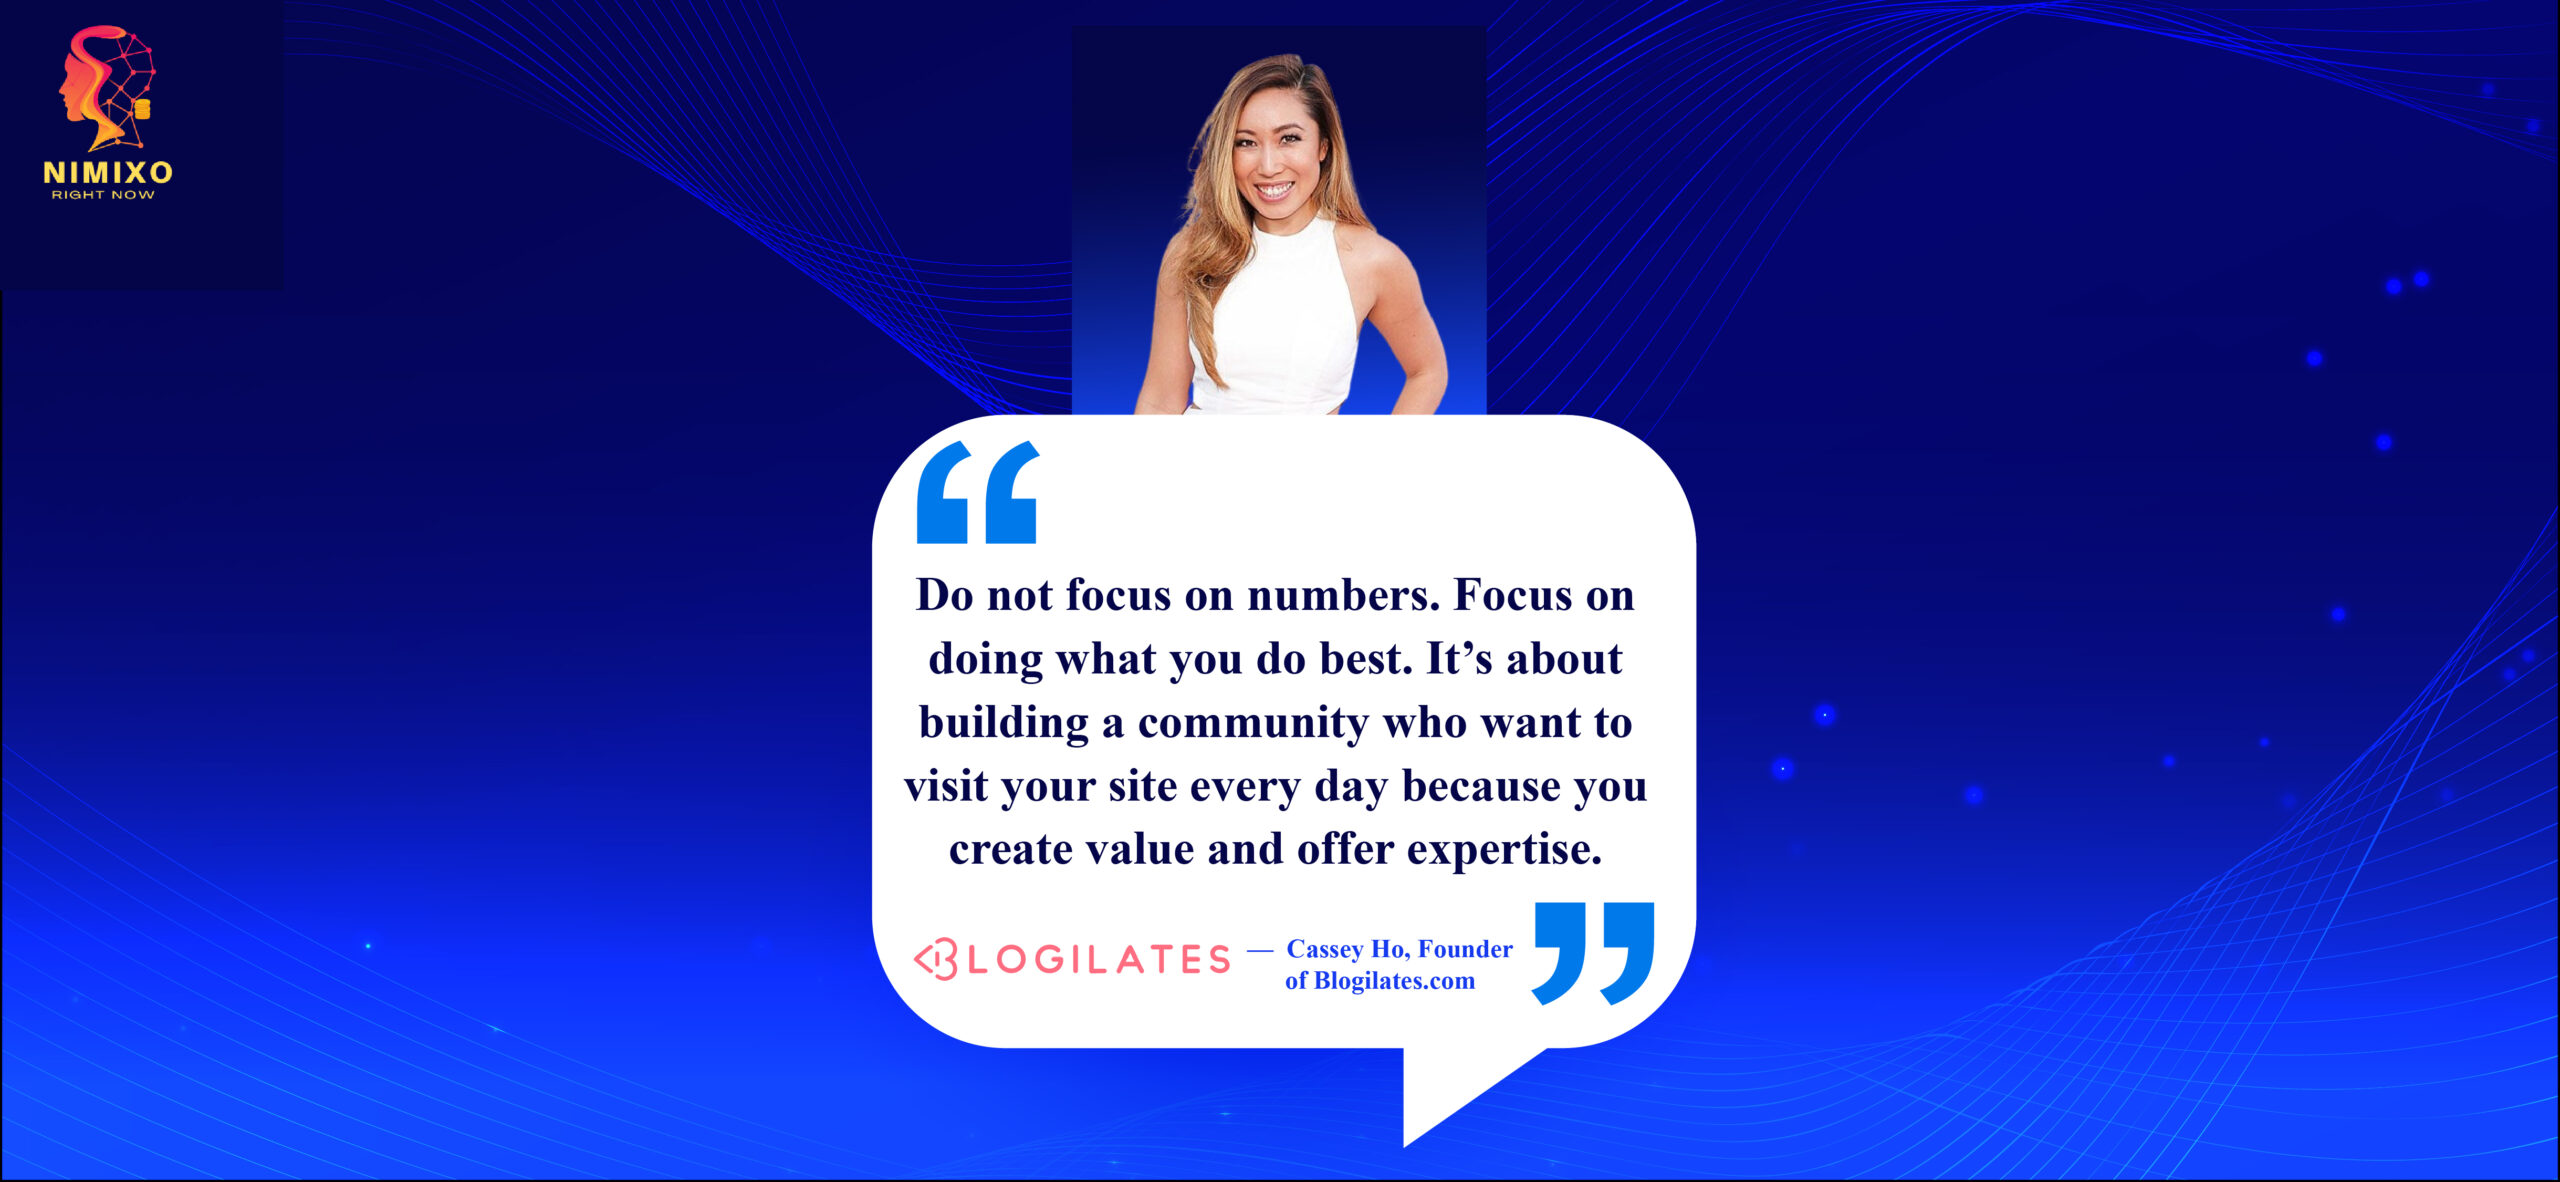 Unlock Your Expertise: Engage Your Audience Like Never Before! Do not focus on numbers. Focus on doing what you do best. It’s about building a community who want to visit your site every day because you create value and offer expertise. -Cassey Ho, Founder of Blogilates.com